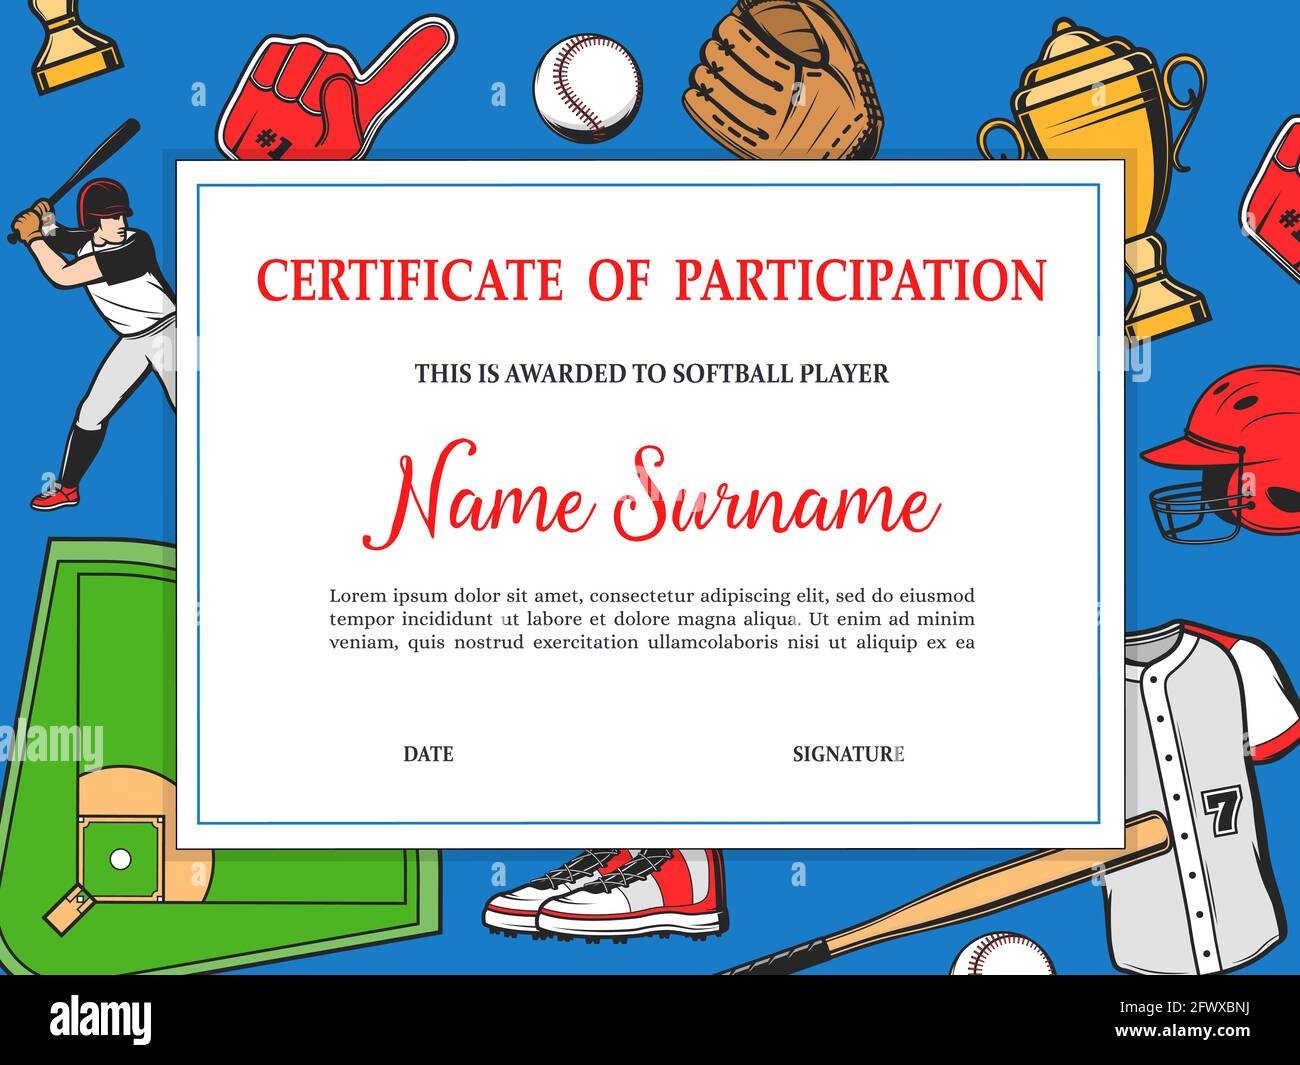 Certificate or diploma of participation to softball player. Baseball tournament team player achievement certificate. Batter, glove and ball, bat, jers Stock Vector